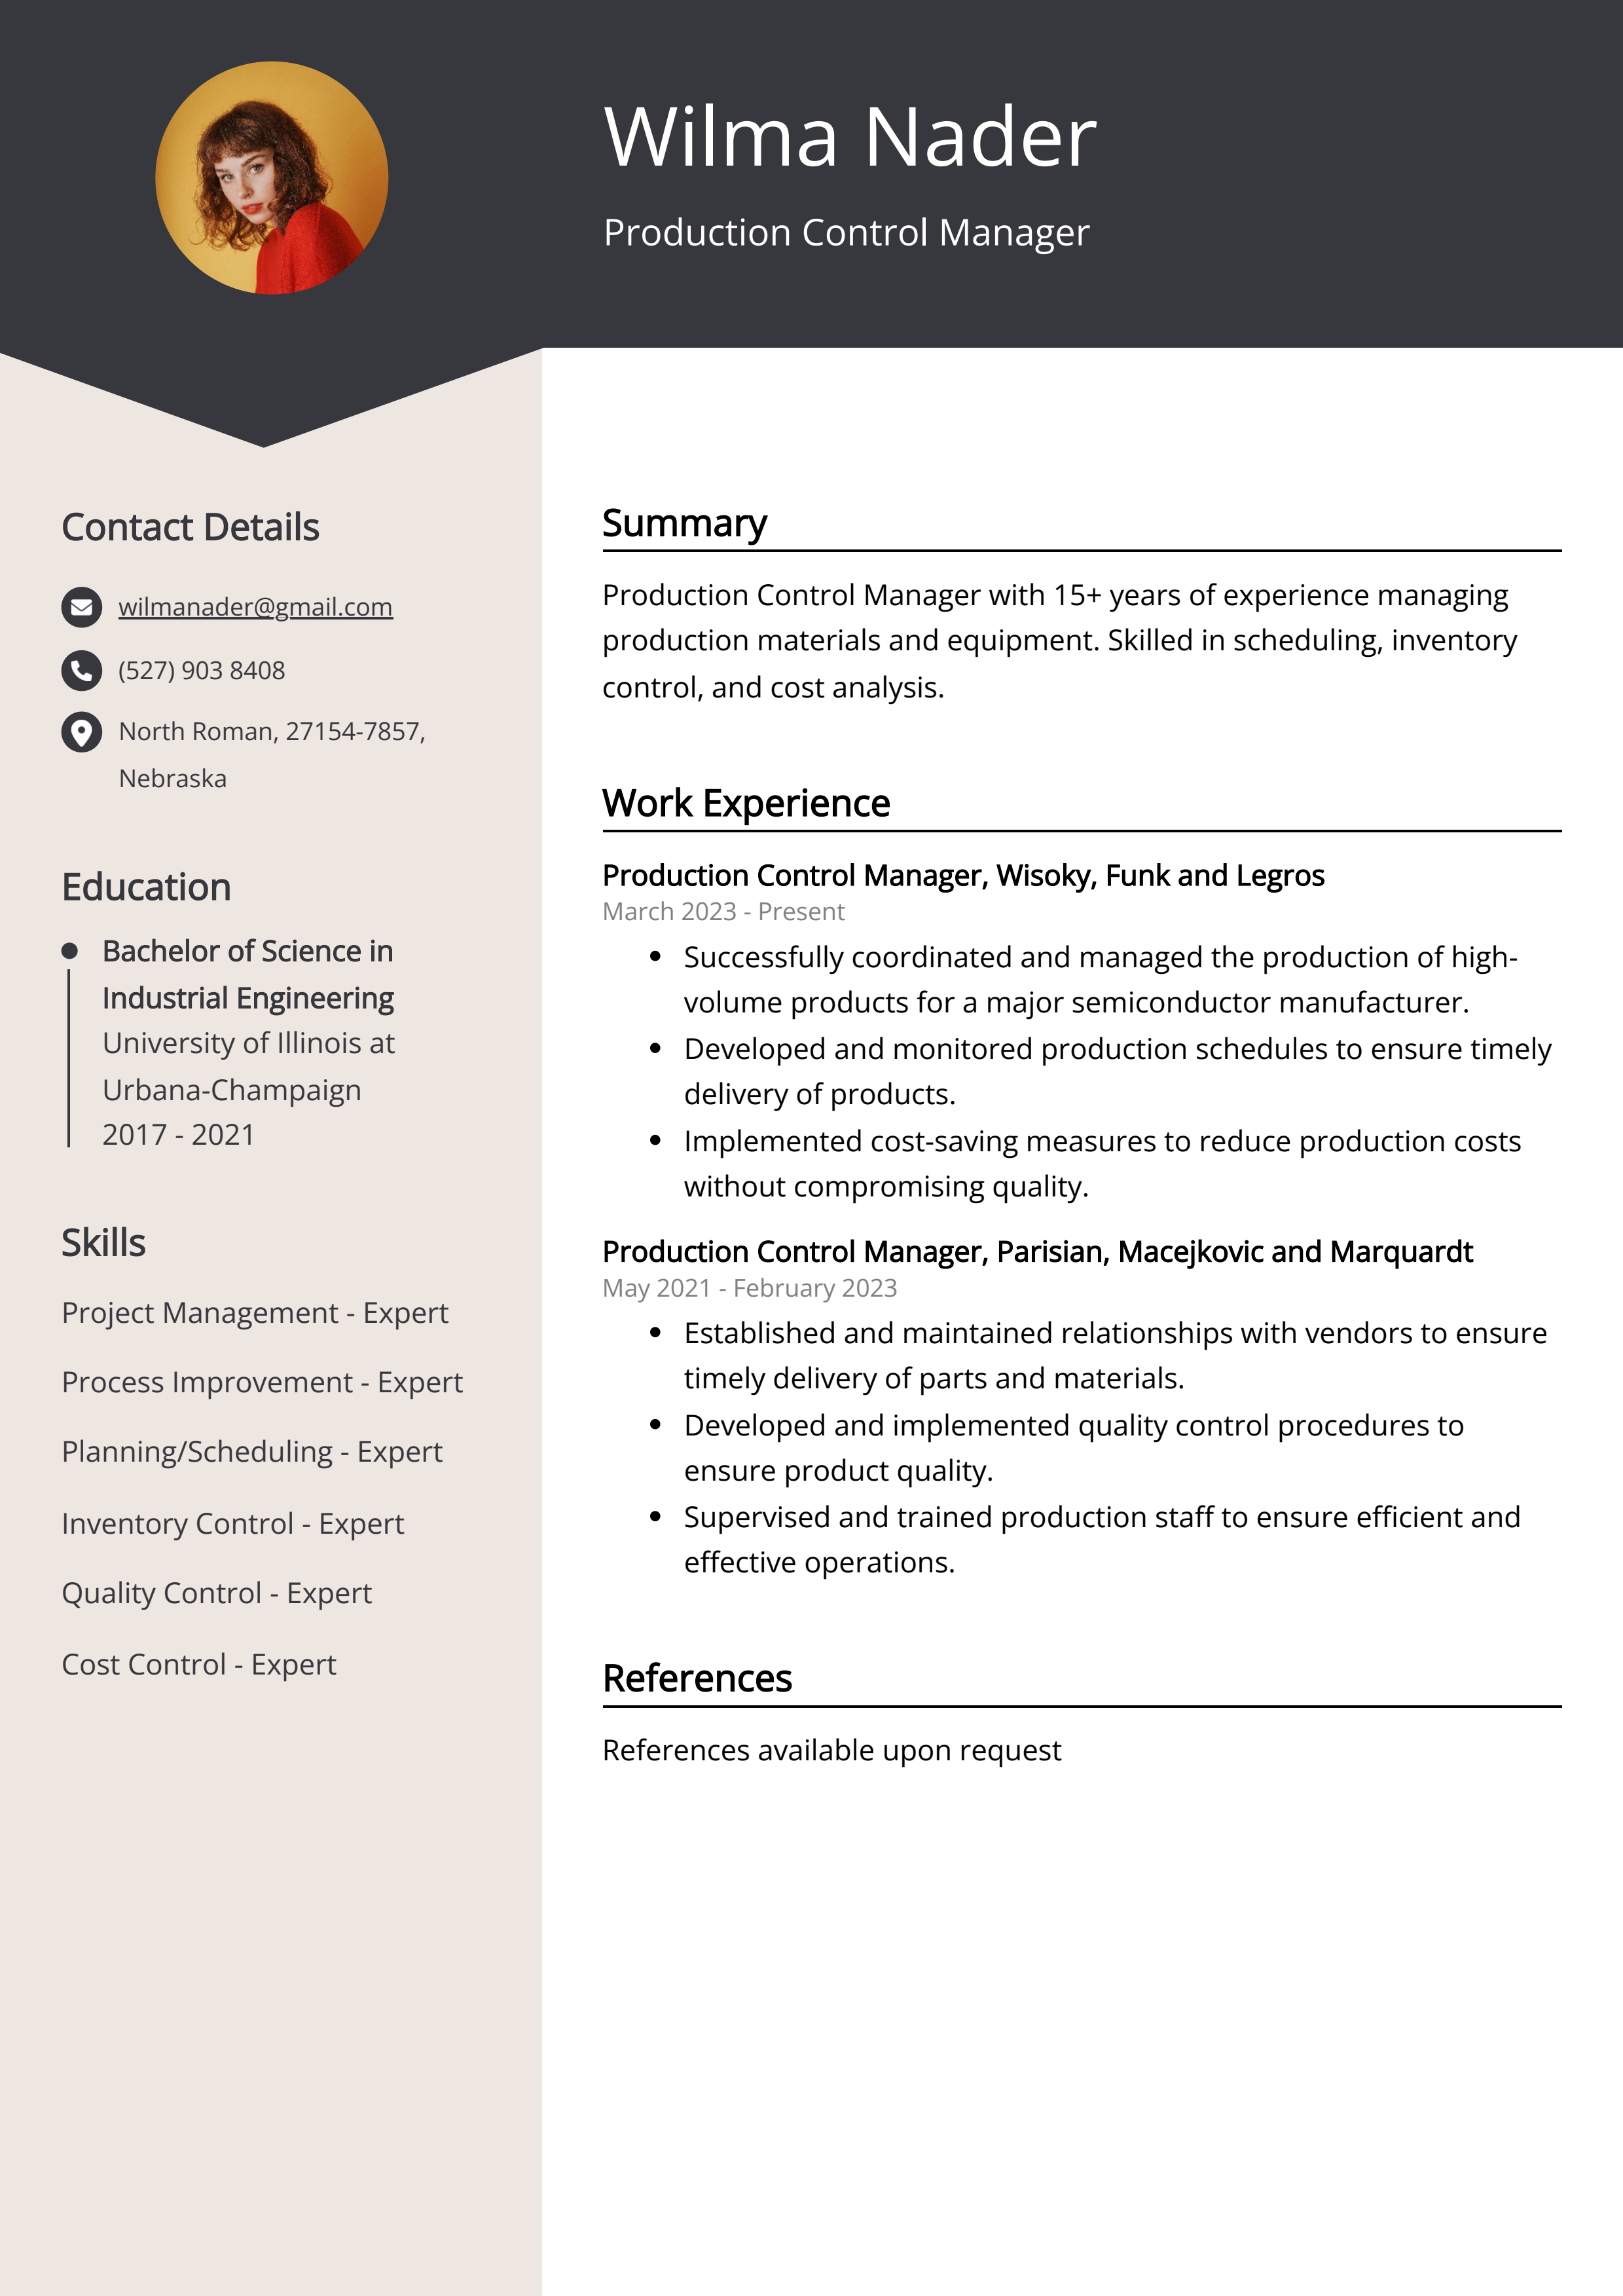 Production Control Manager CV Example